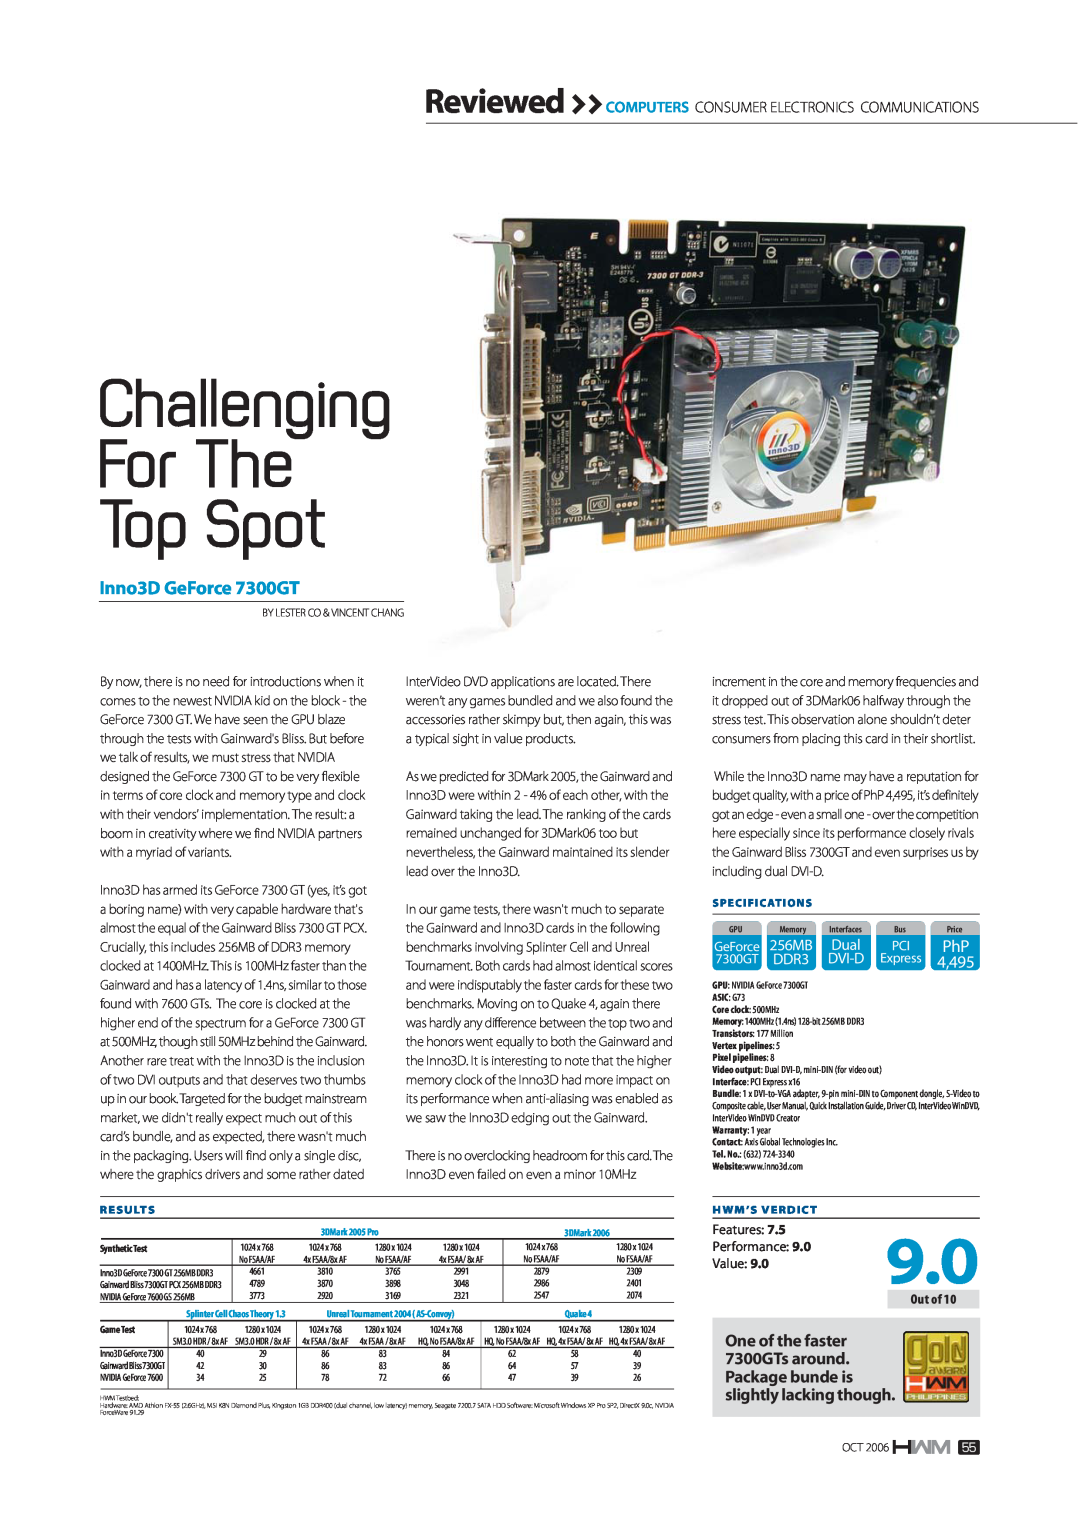 Gainward user manual Challenging For The Top Spot, Inno3D GeForce 7300GT, Dual, DDR3, Dvi-D, 4,495, Features, Value 